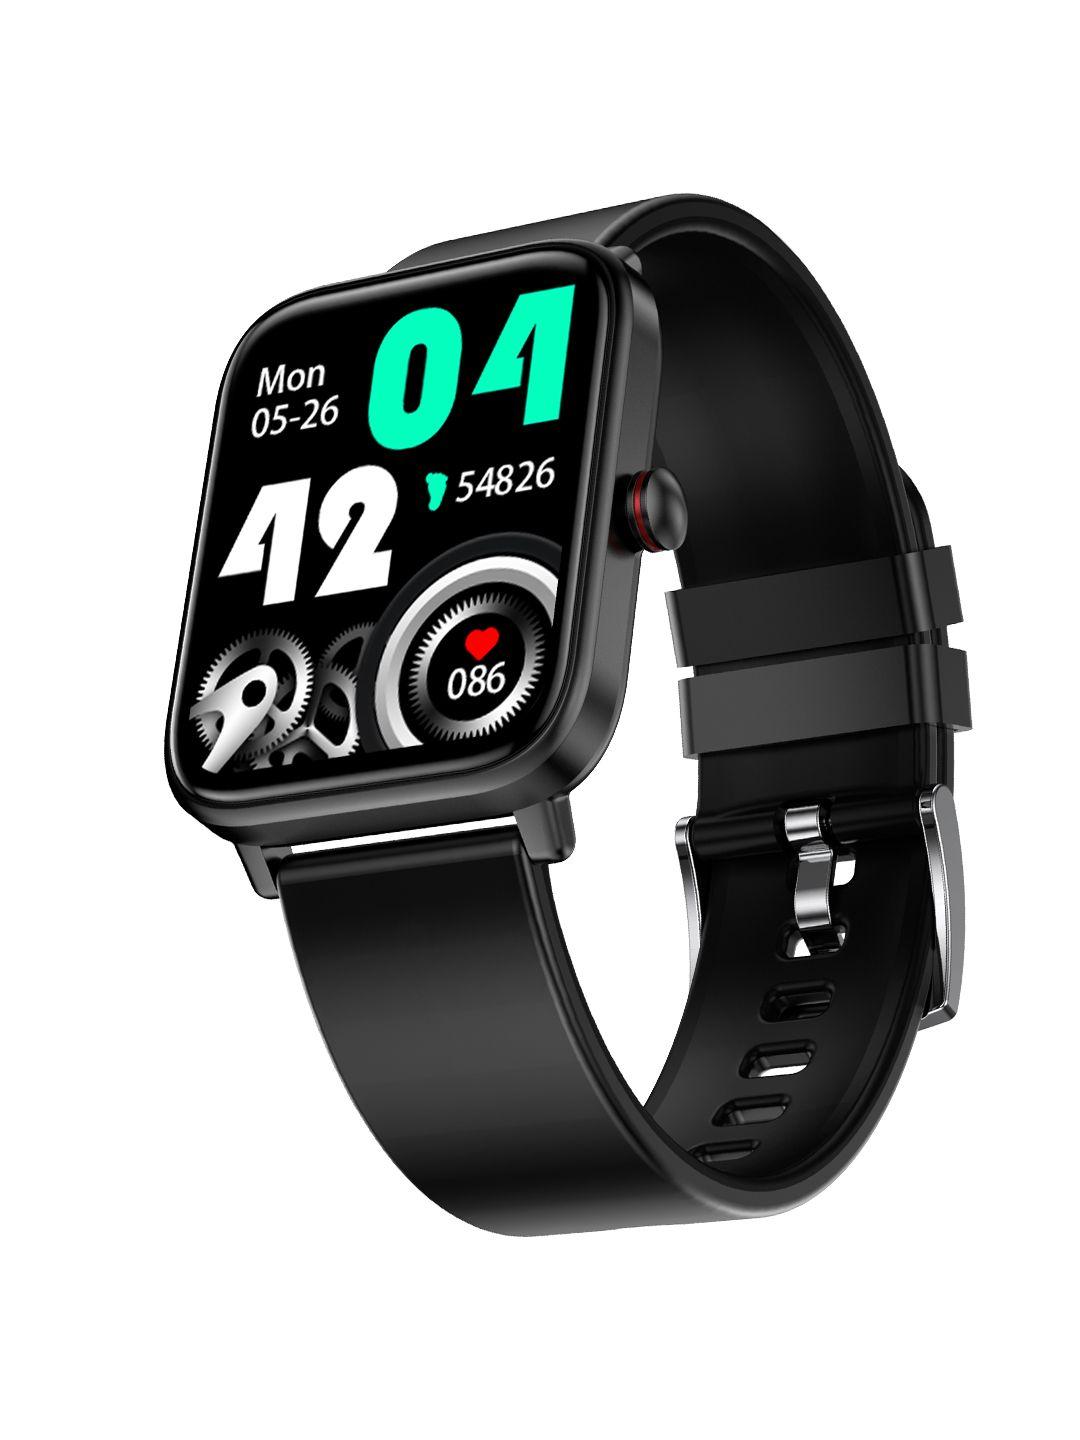 fire-boltt ninja pro max plus 1.83 inch smartwatch with ip68 & spo2 monitoring 26bswaay10